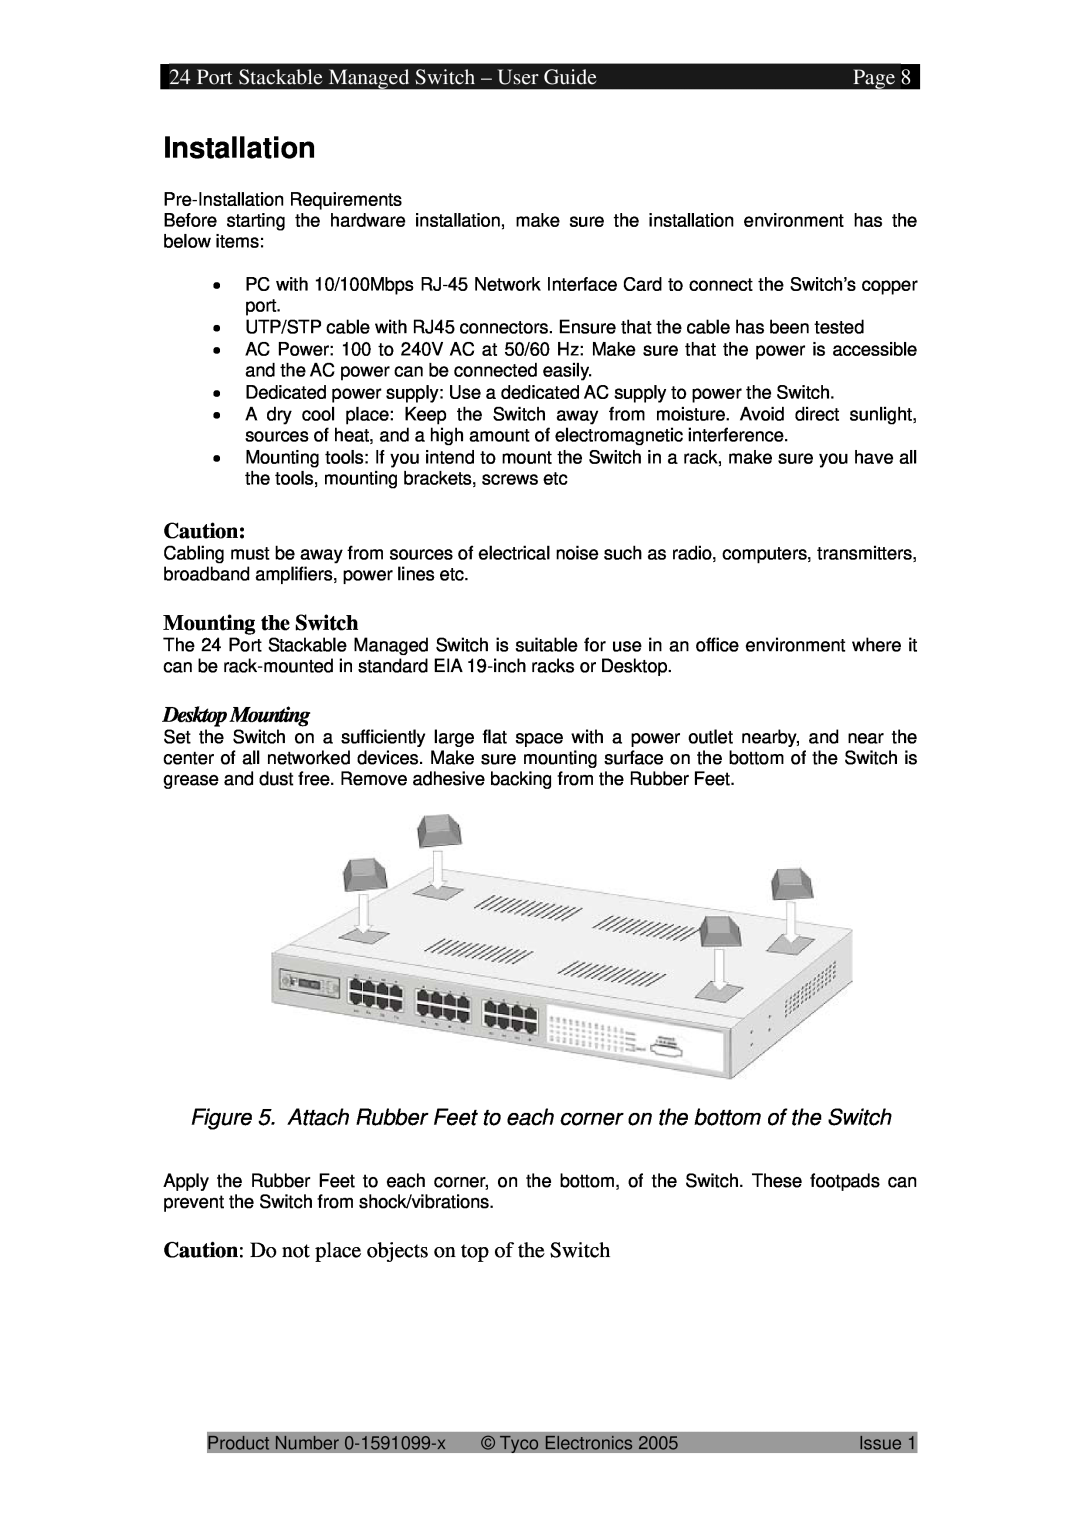 Tyco 0-1591099-x manual Installation, Port Stackable Managed Switch - User Guide, Page, Mounting the Switch 